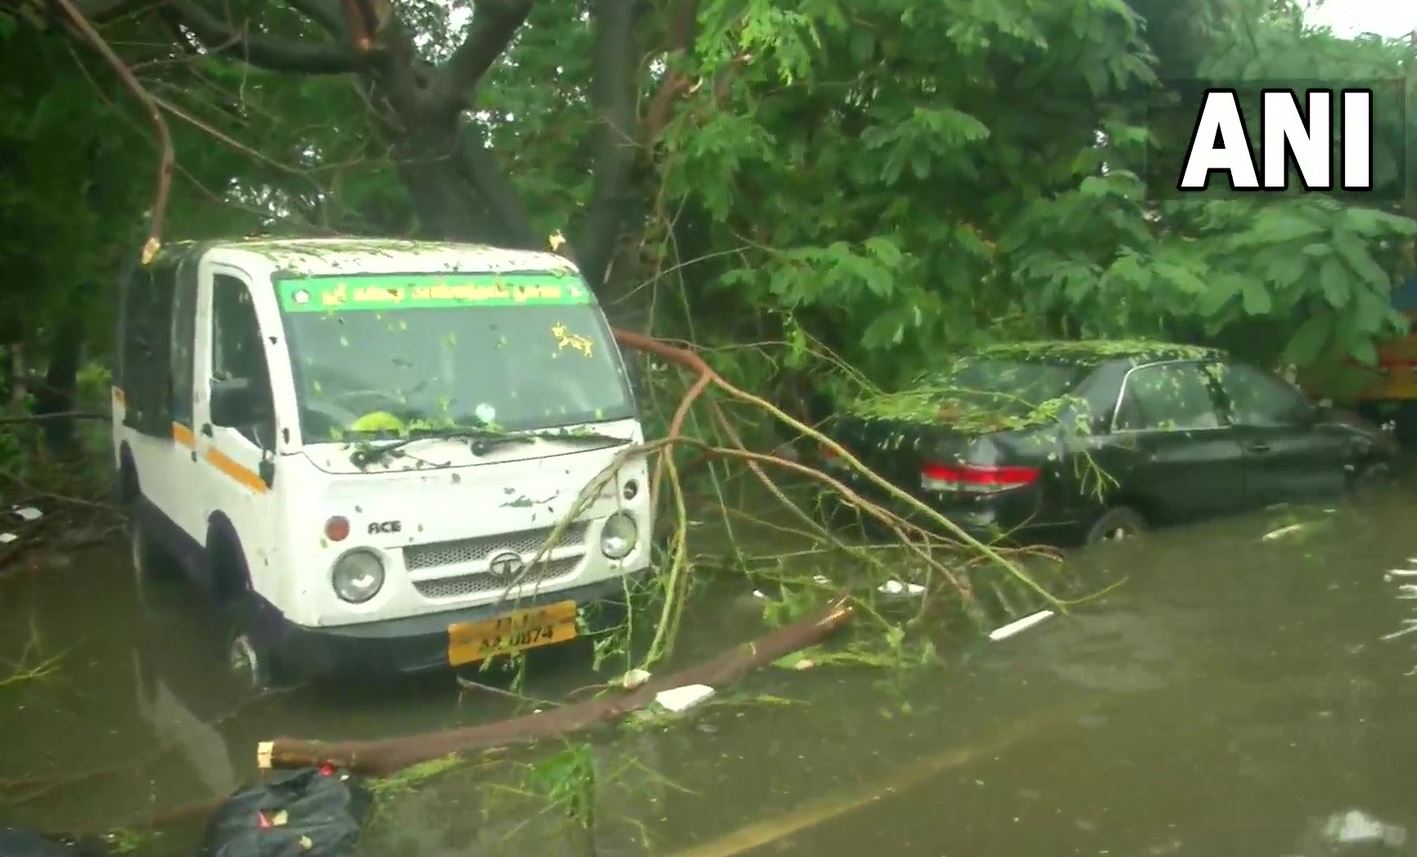 Intense rains in Chennai after years